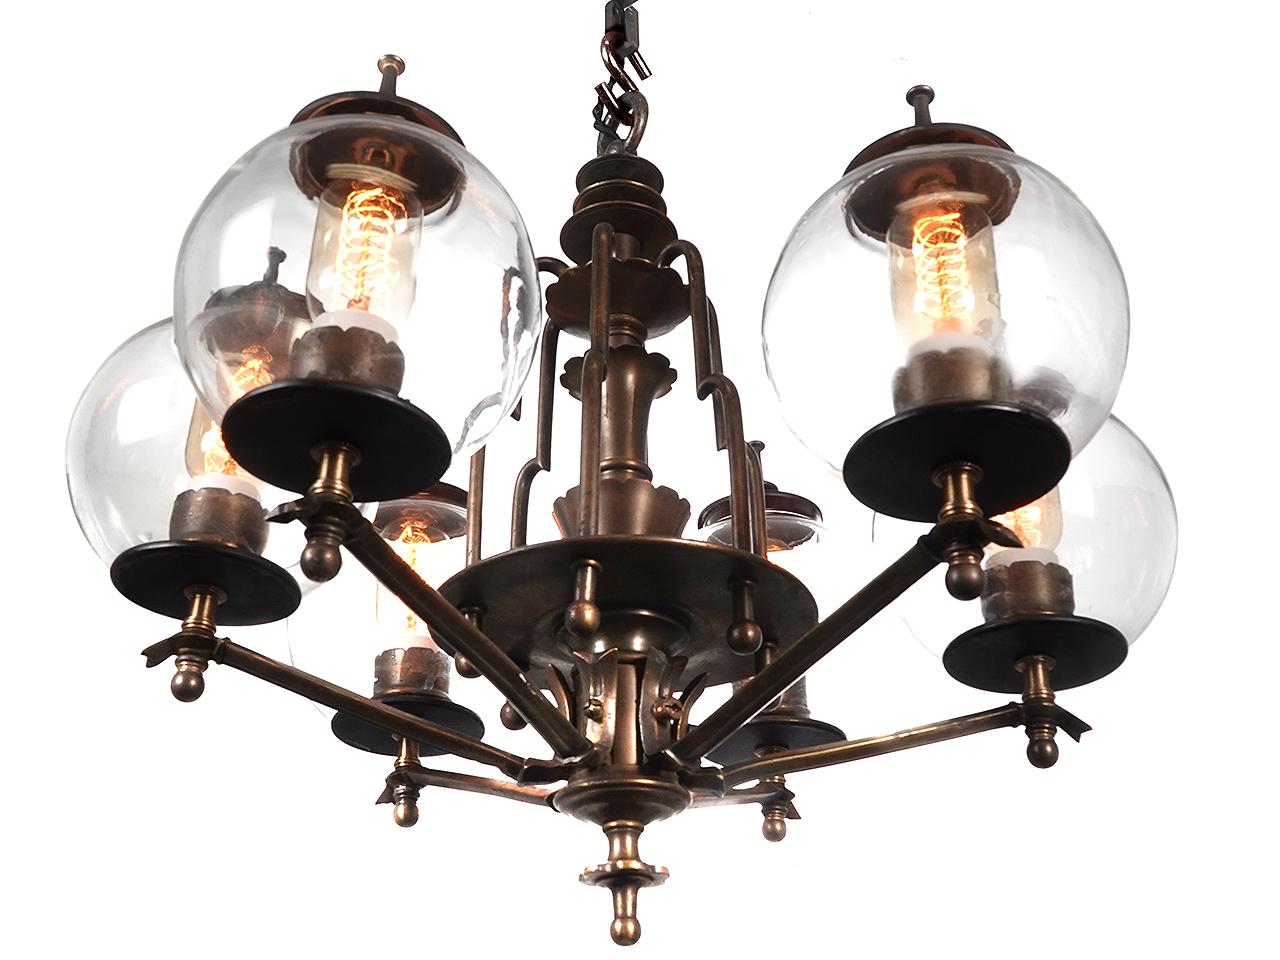 Metropolis Style Art Deco Chandeliers, Matching Pair In Good Condition For Sale In Peekskill, NY